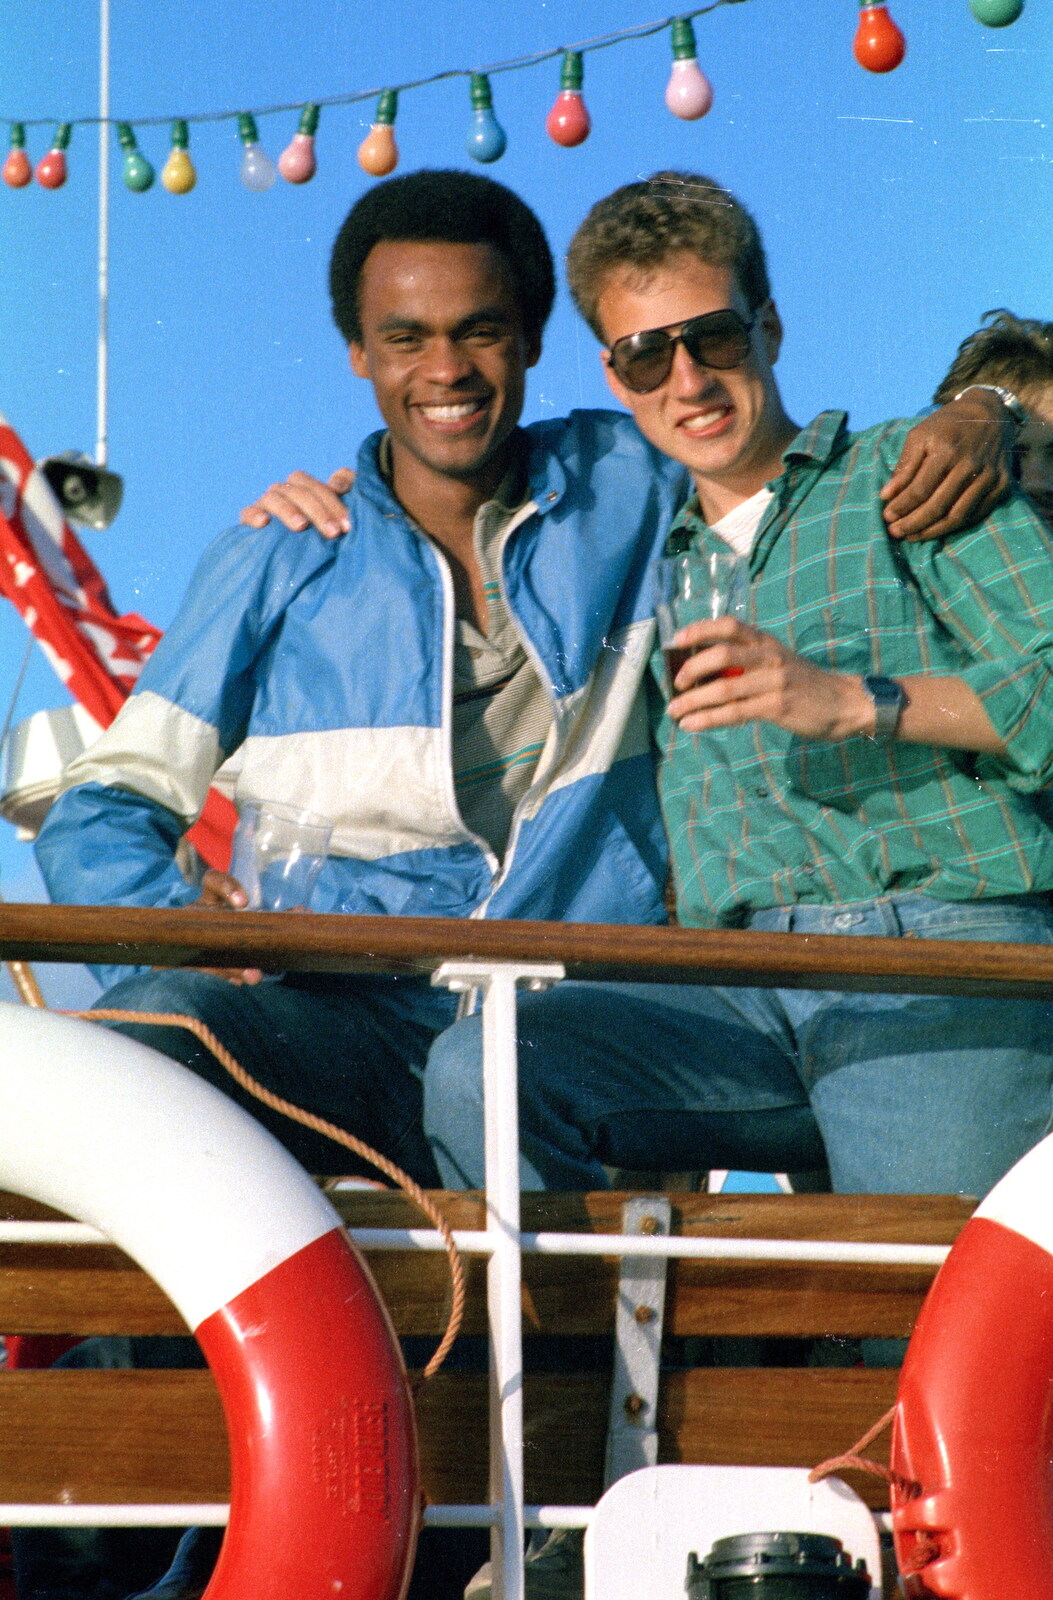 Simon Bento and Michael Bey from Uni: A Student Booze Cruise, Plymouth Sound, Devon - 2nd May 1986